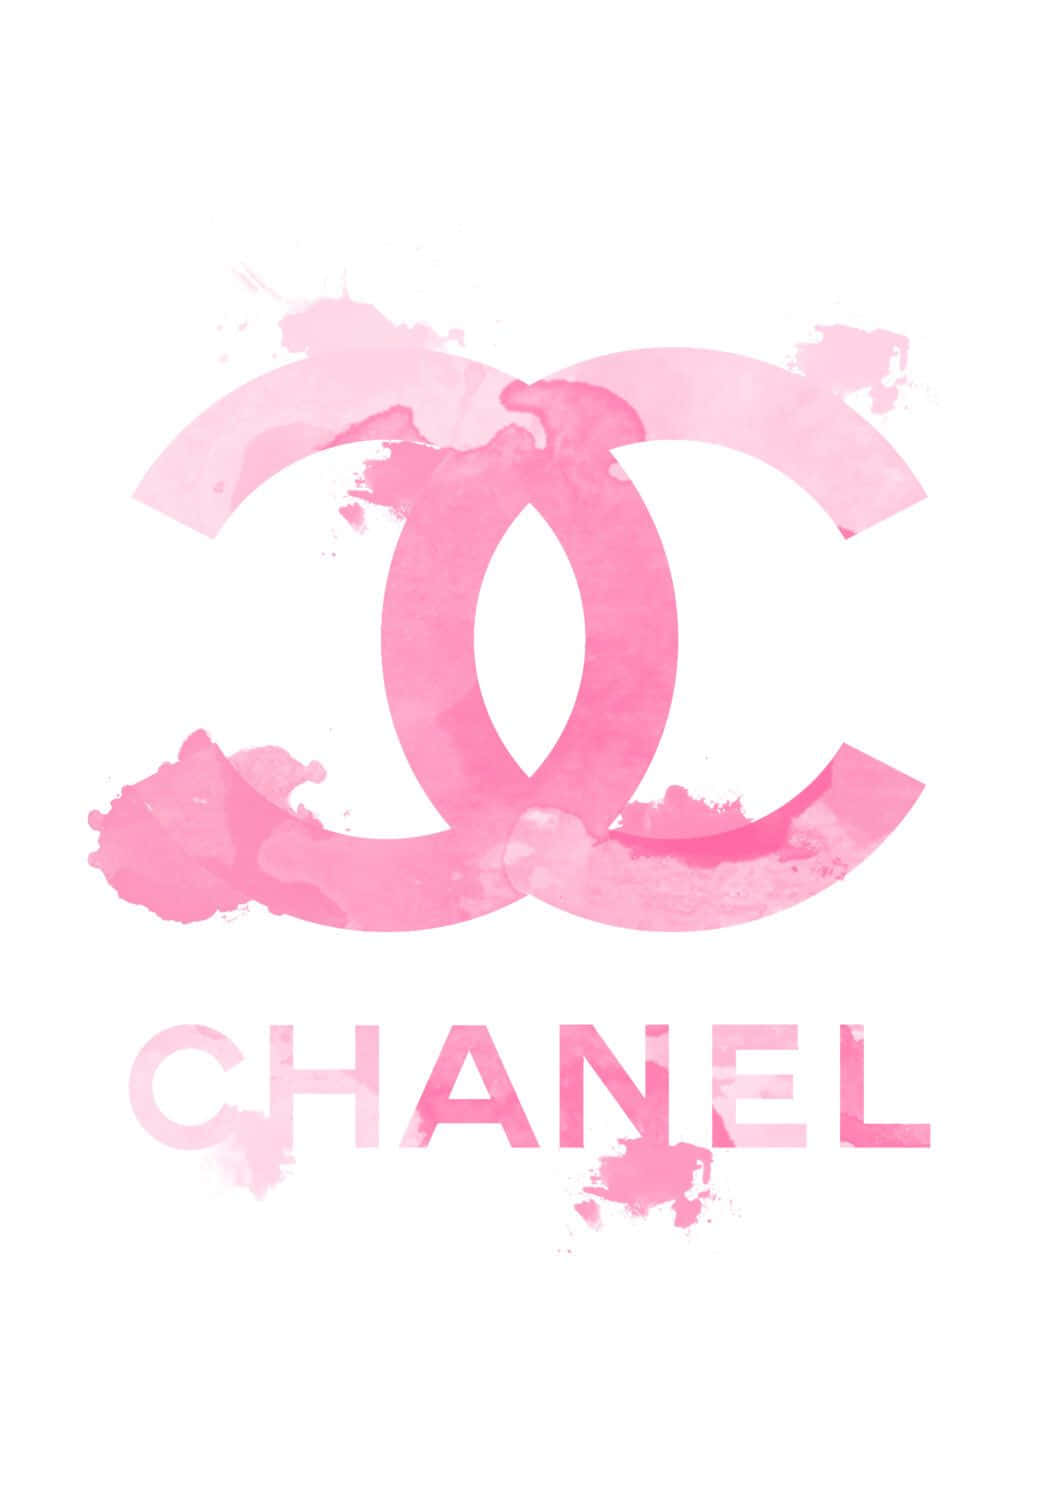 Iconic Logo of the World-Renowned Brand, Chanel